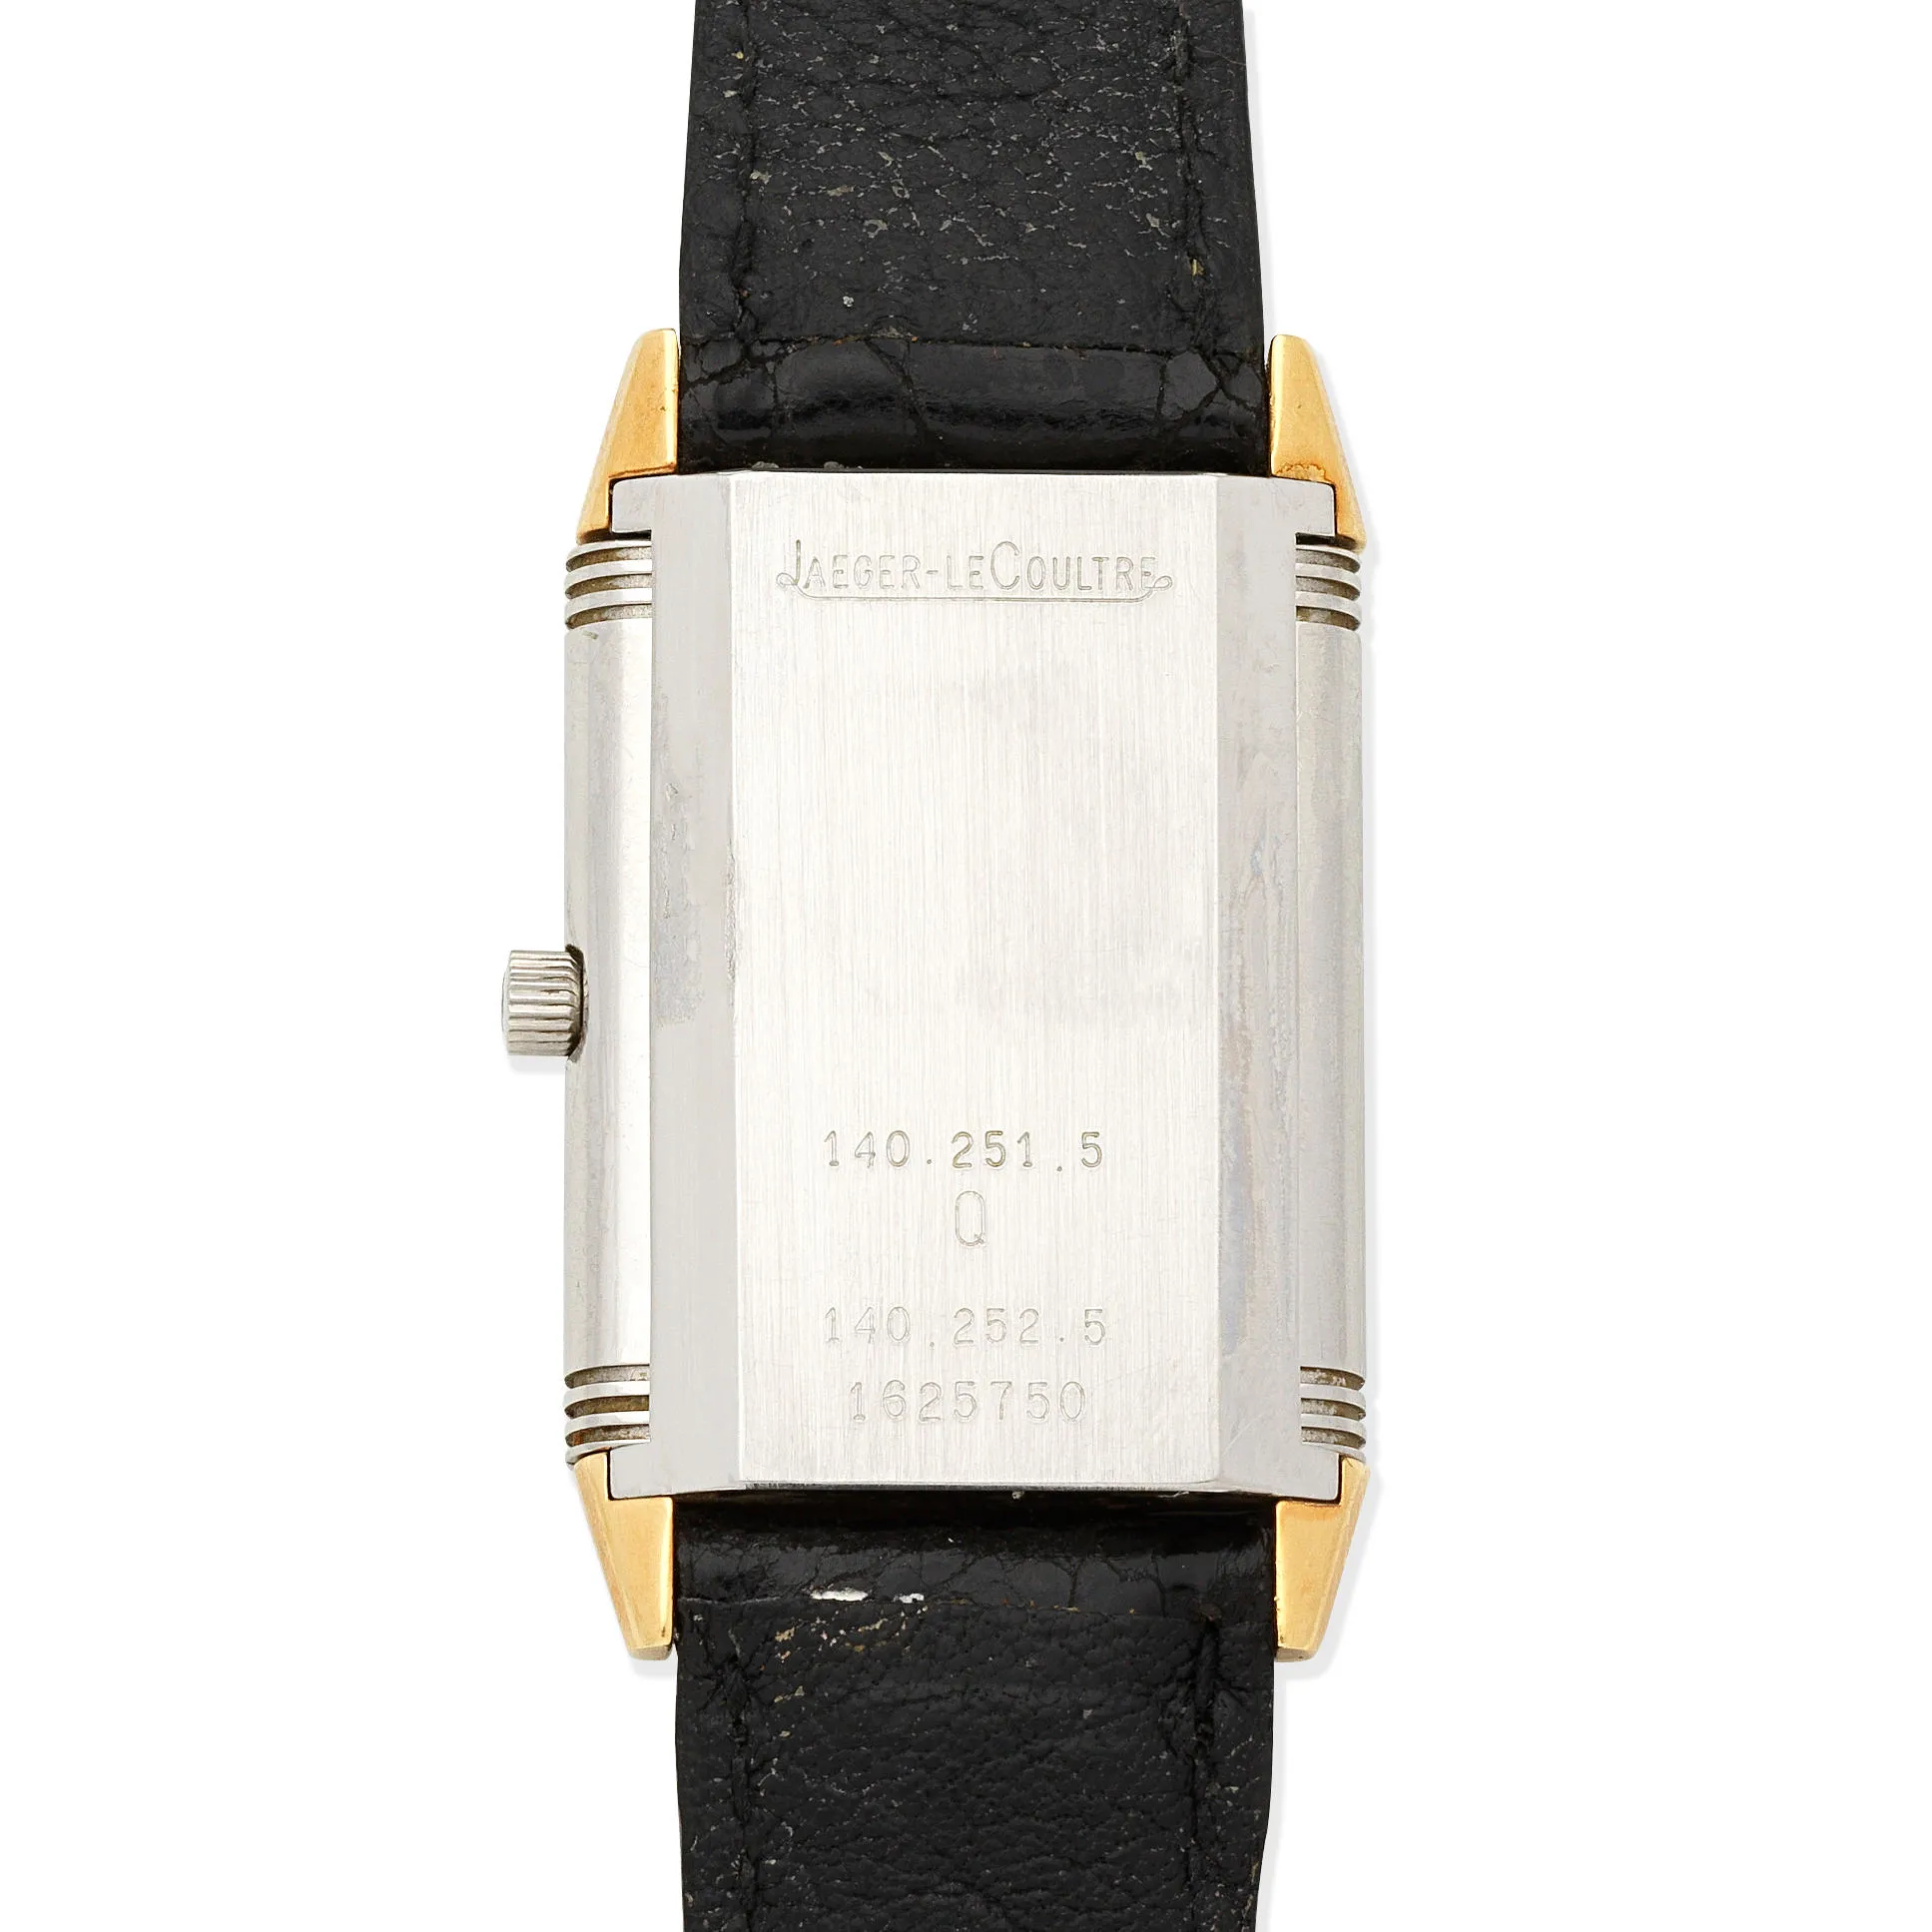 Jaeger-LeCoultre Reverso 140.251.5 23mm Steel & gold Champagne 2